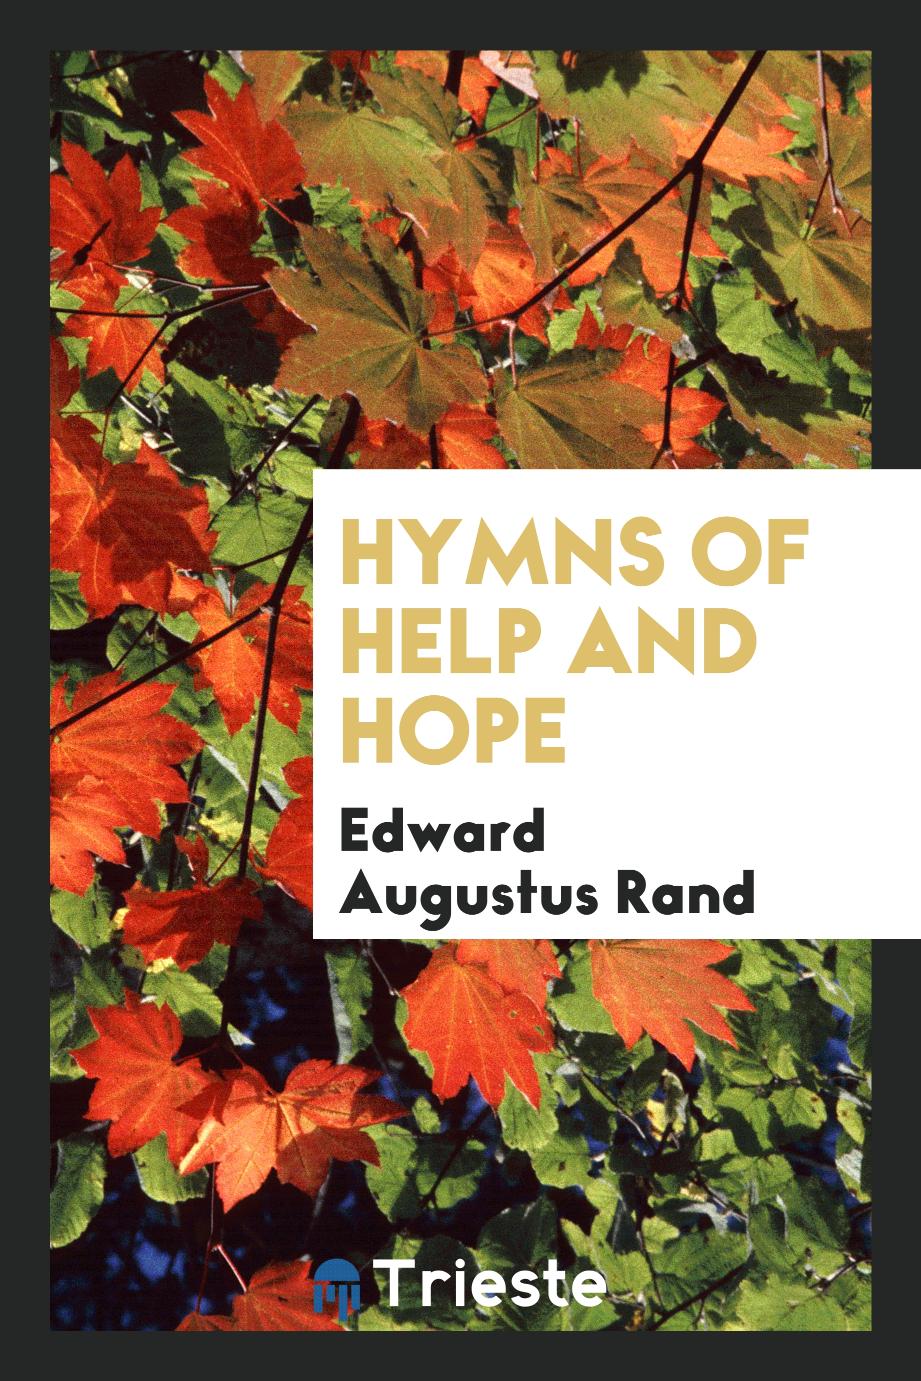 Hymns of help and hope